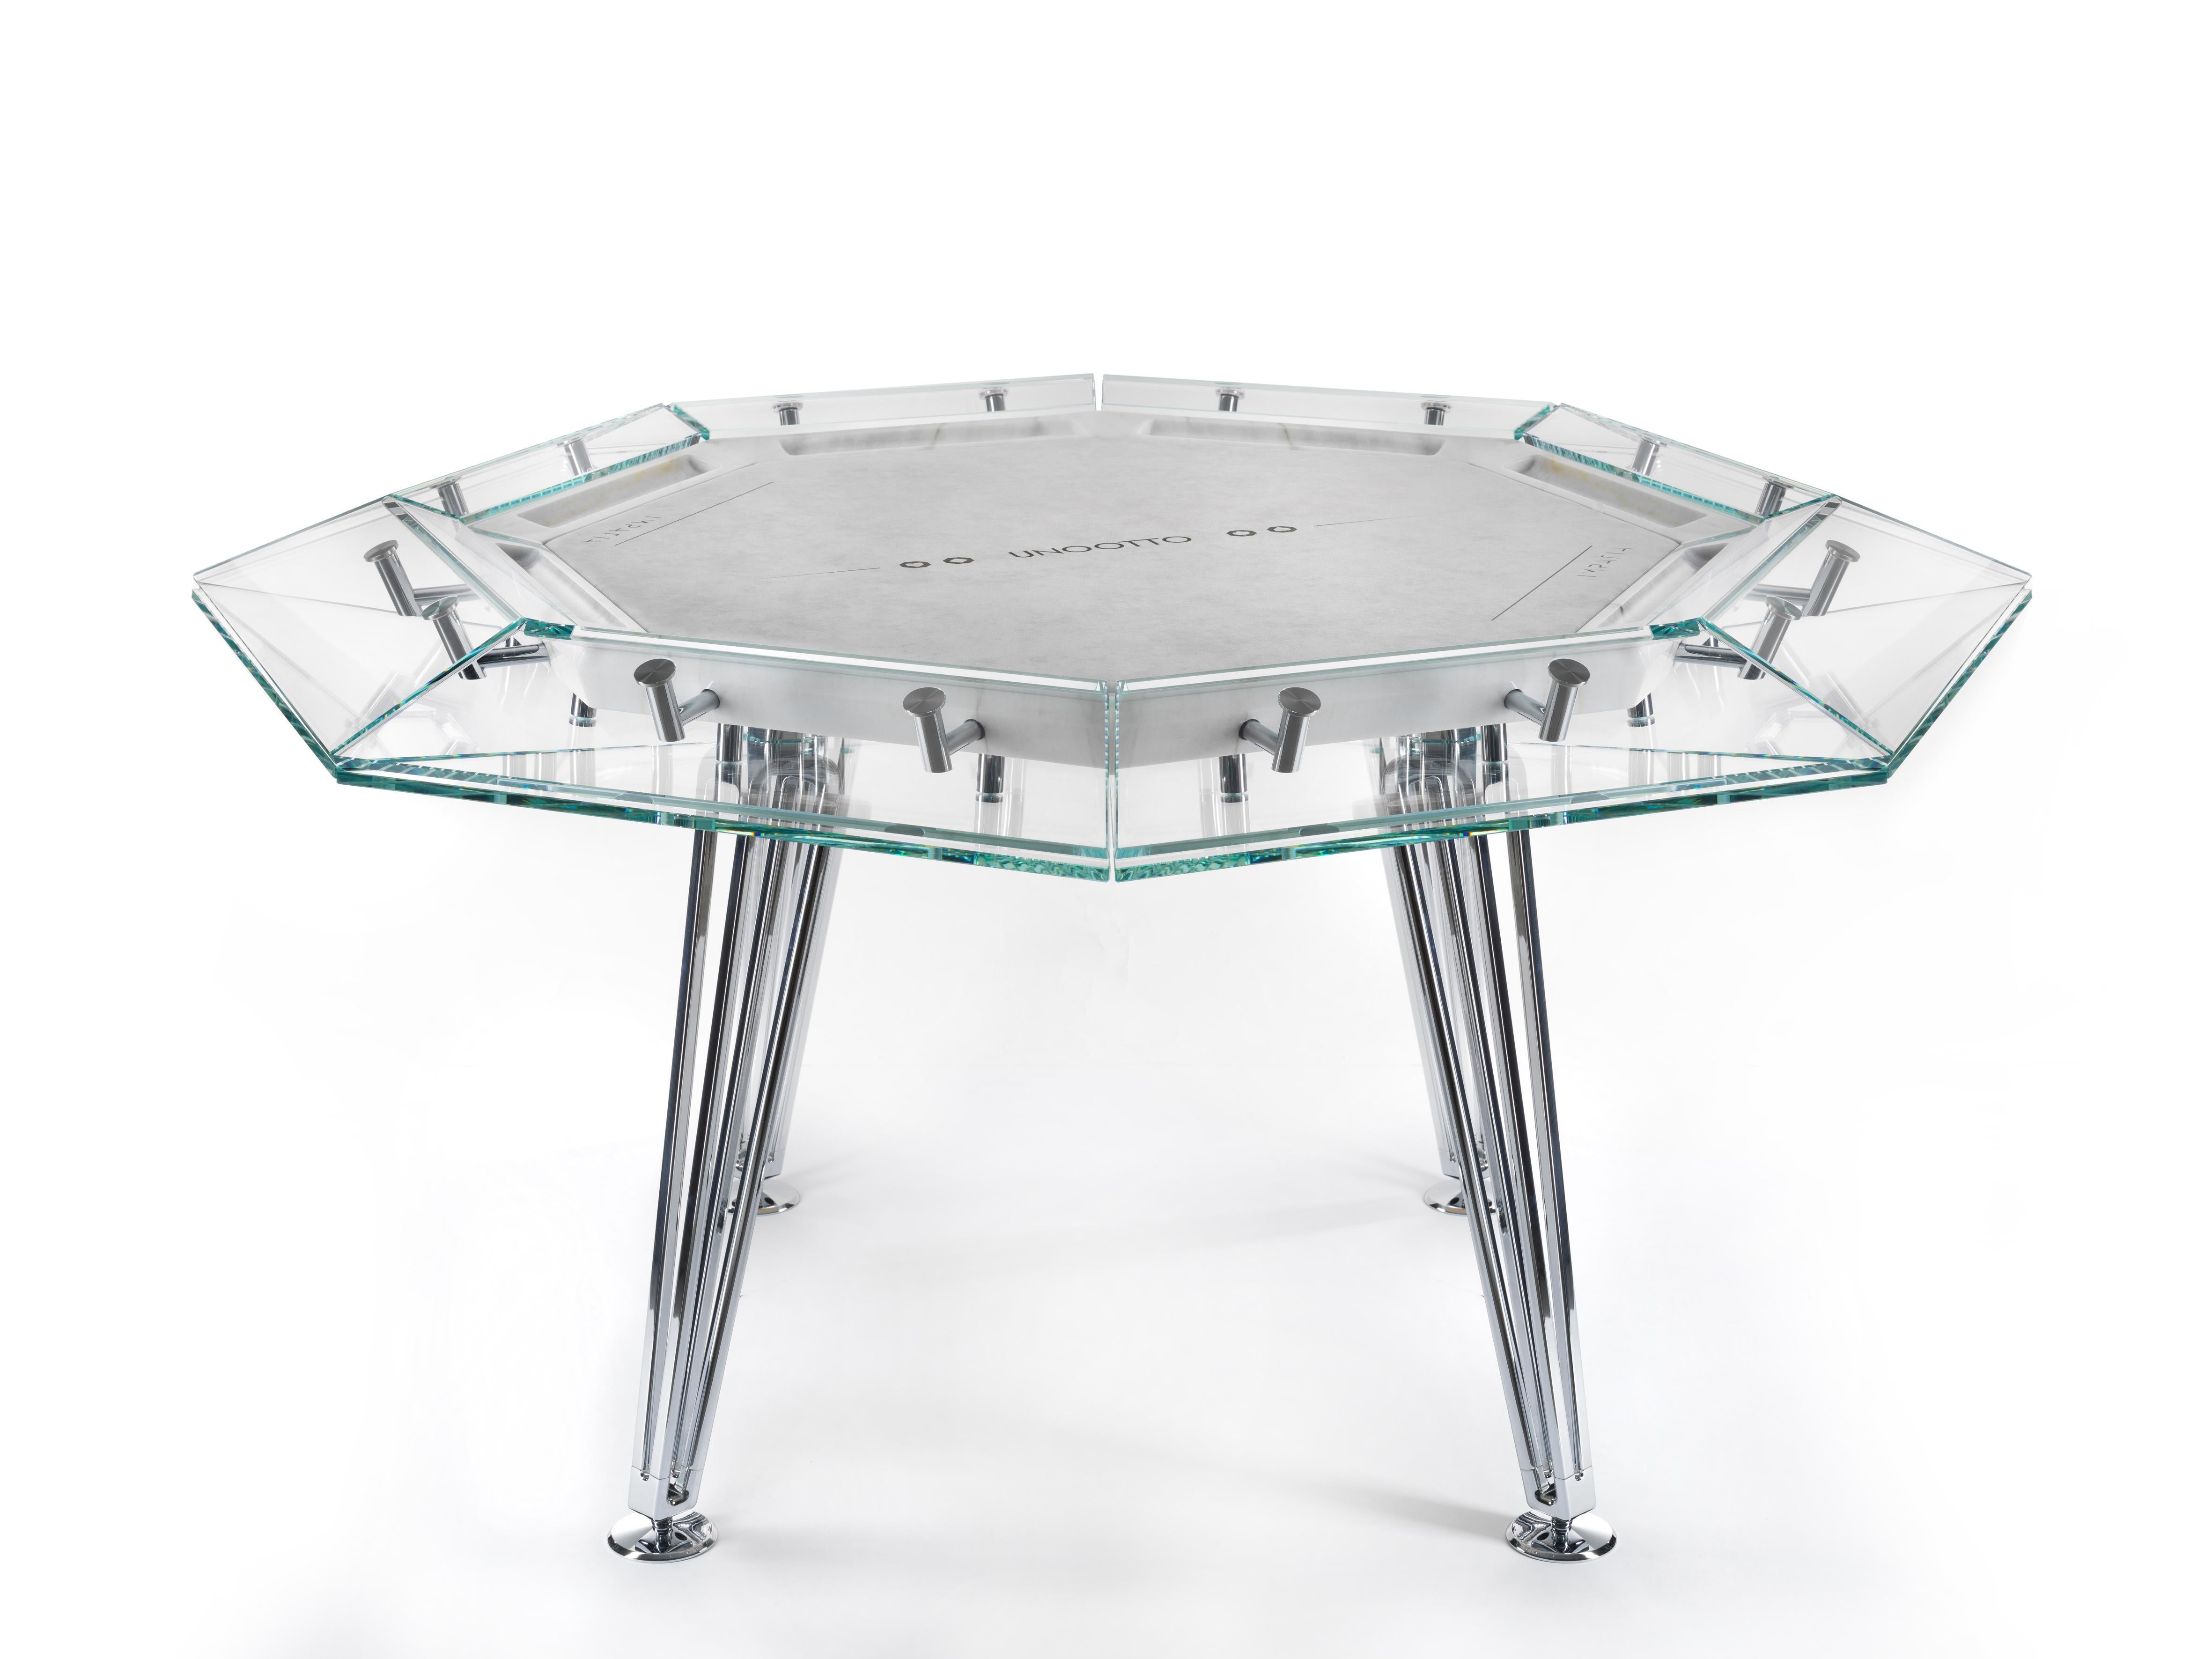 Unootto reinterprets the traditional professional poker table, making the A-game stylish and sophisticated.

This one-of-a-kind octagonal poker table features a unique low-iron glass top edge supported by an inner white marble top, finished off with